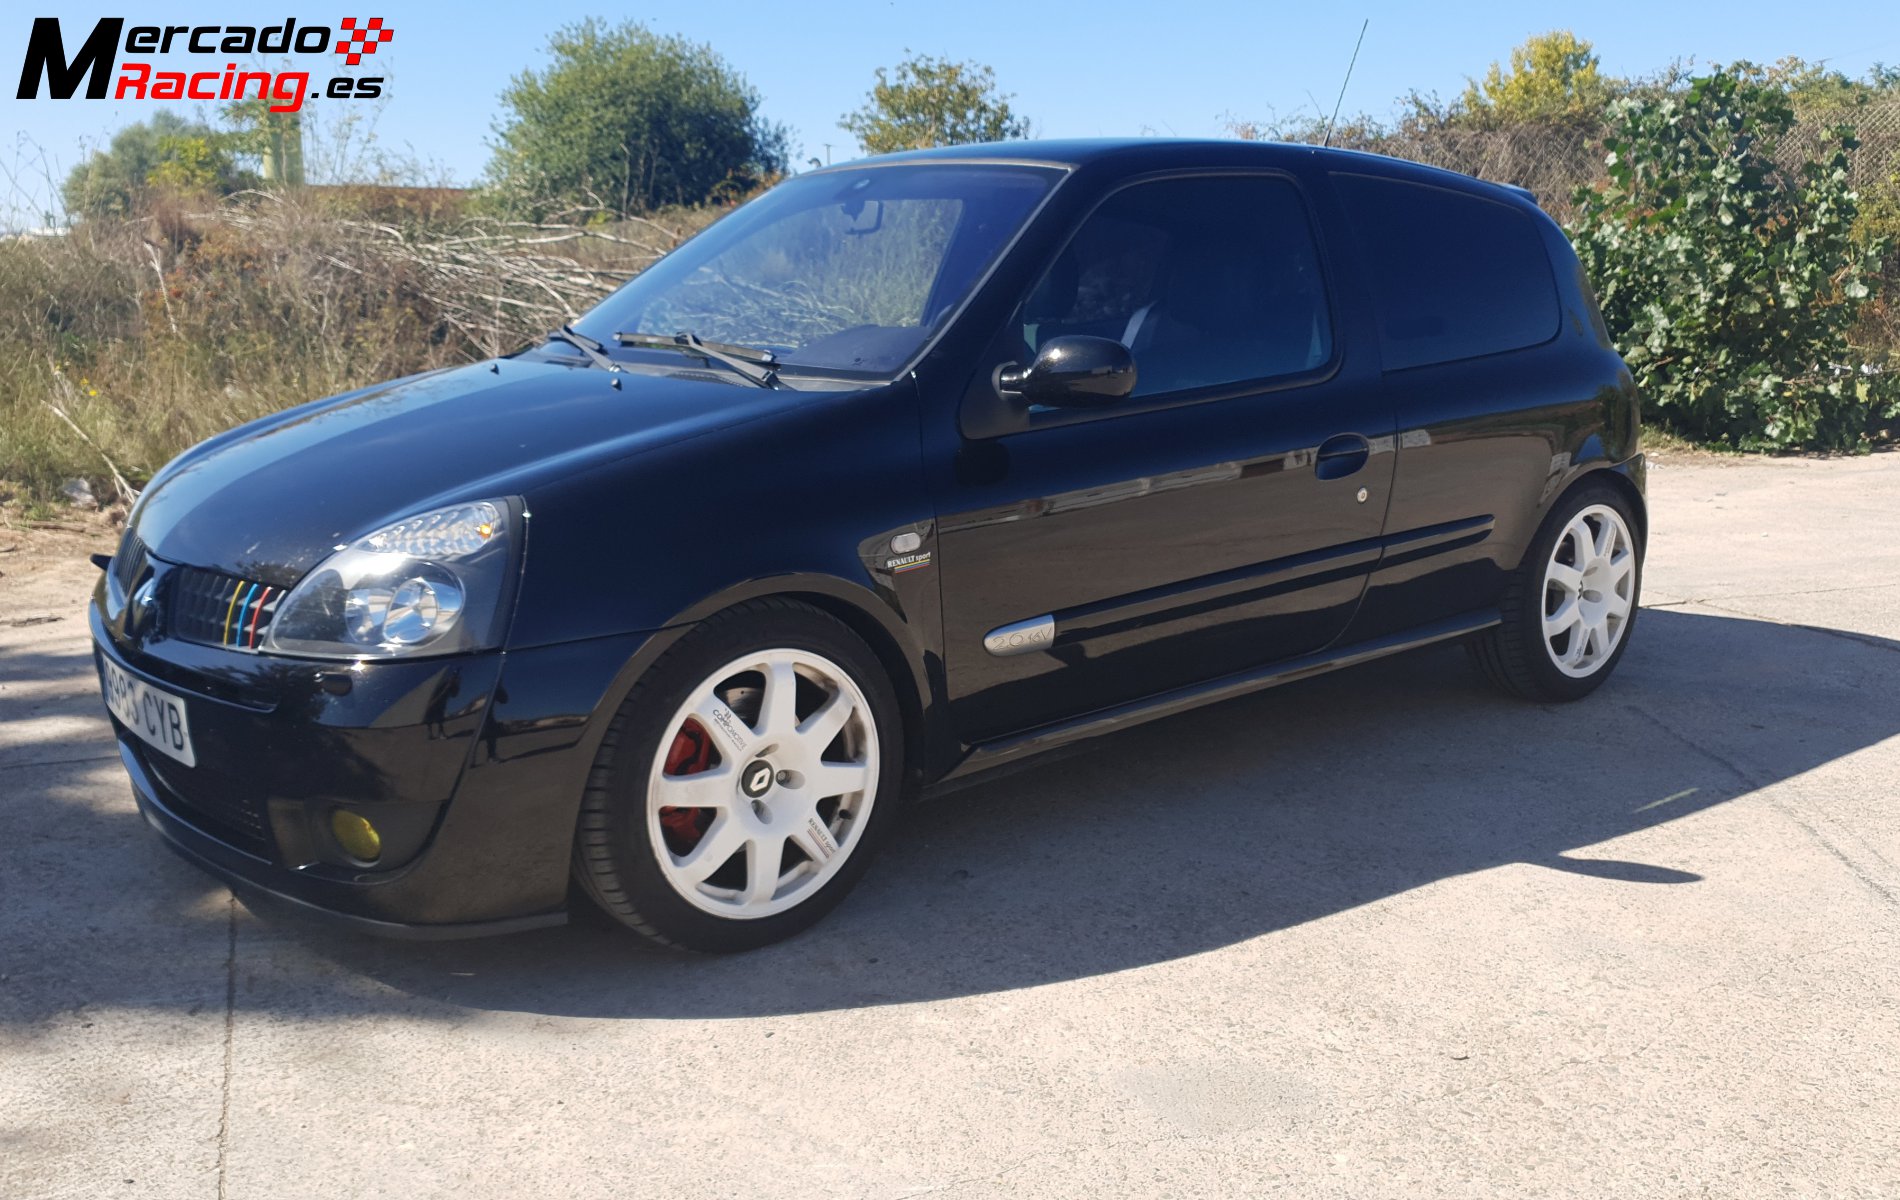 Renault clio 182 cup